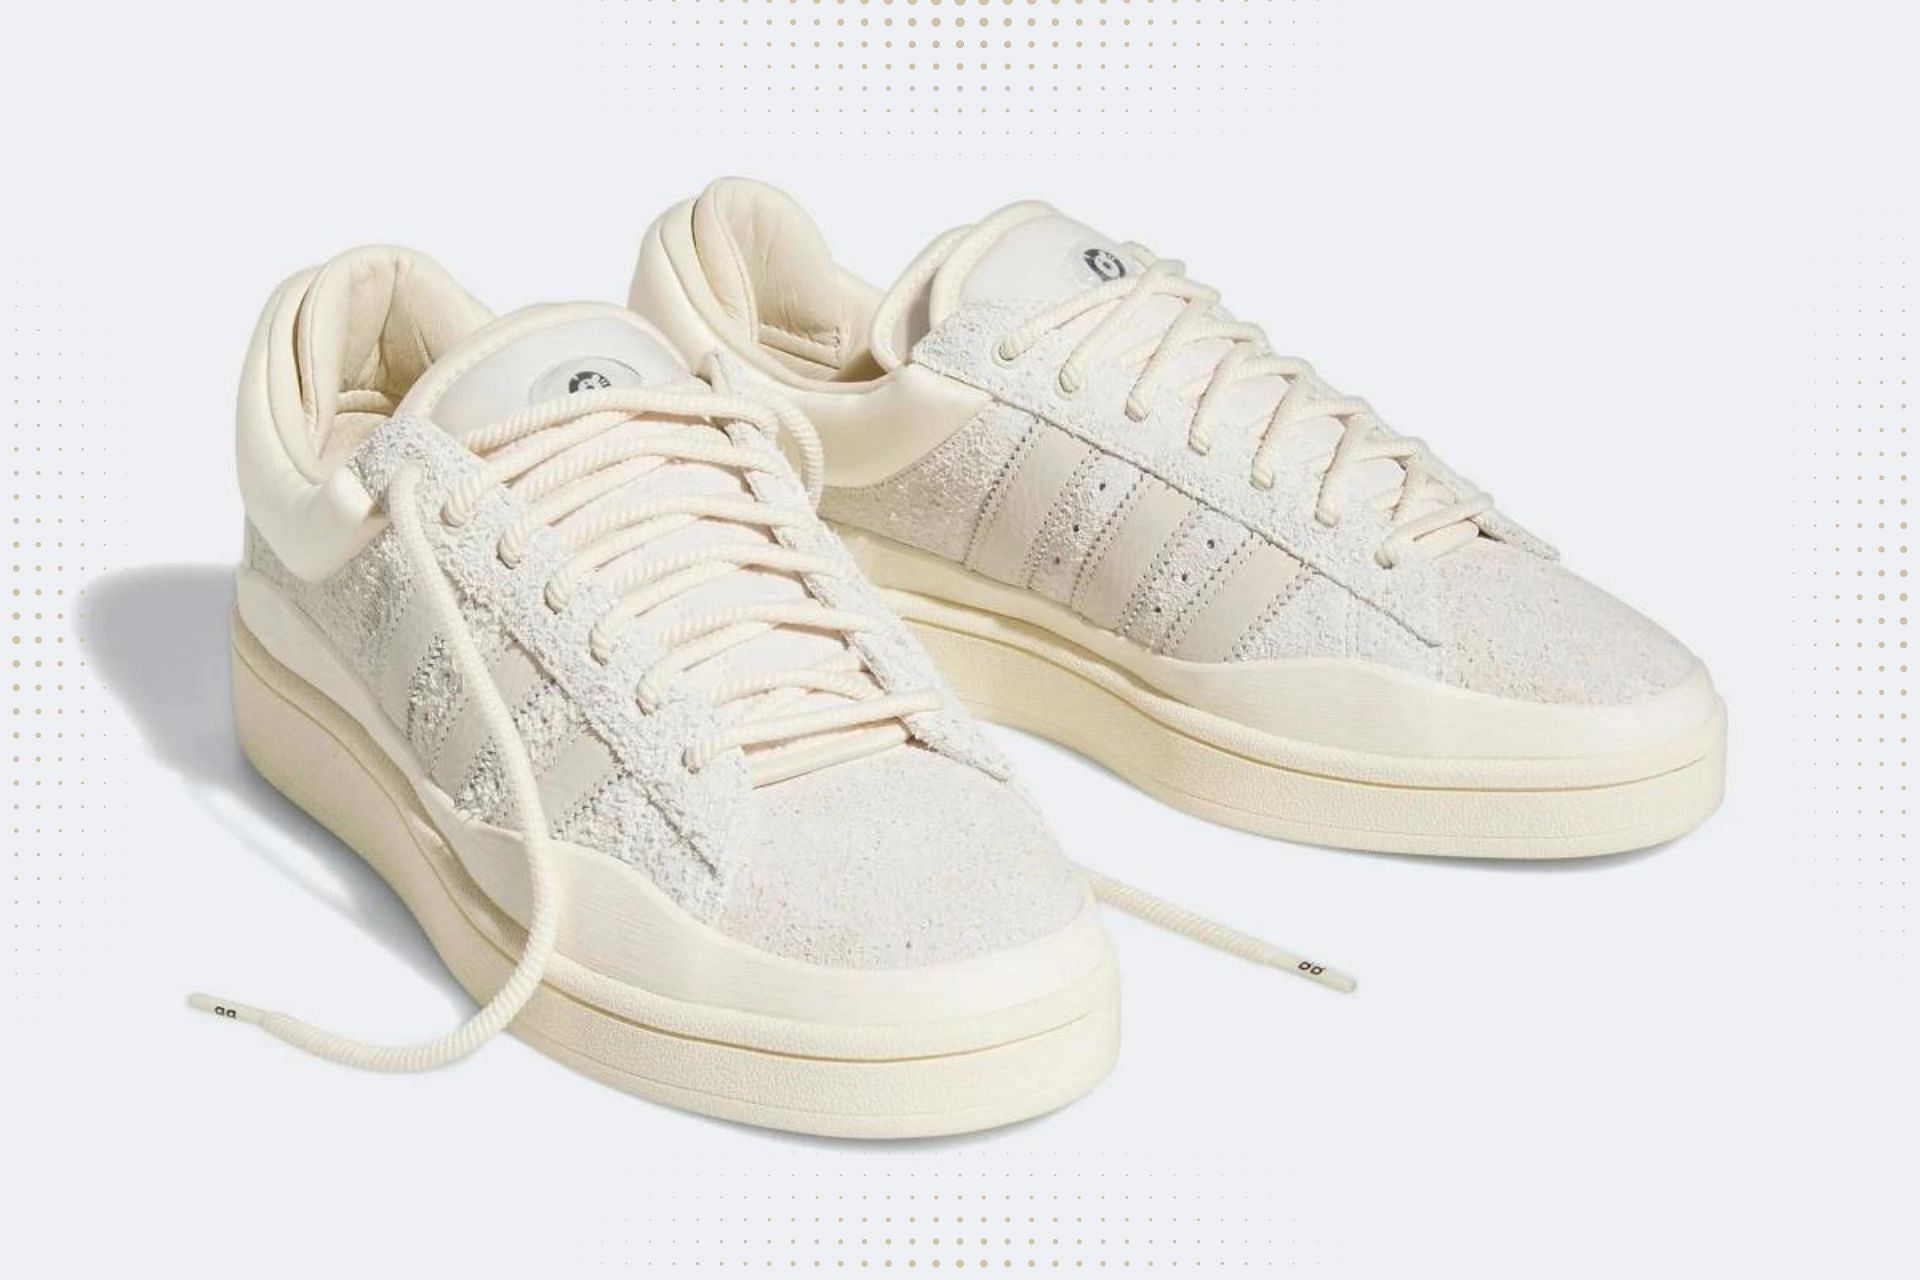 Bad Bunny x Adidas Campus &quot;Cloud White&quot; sneakers (Image via Adidas)